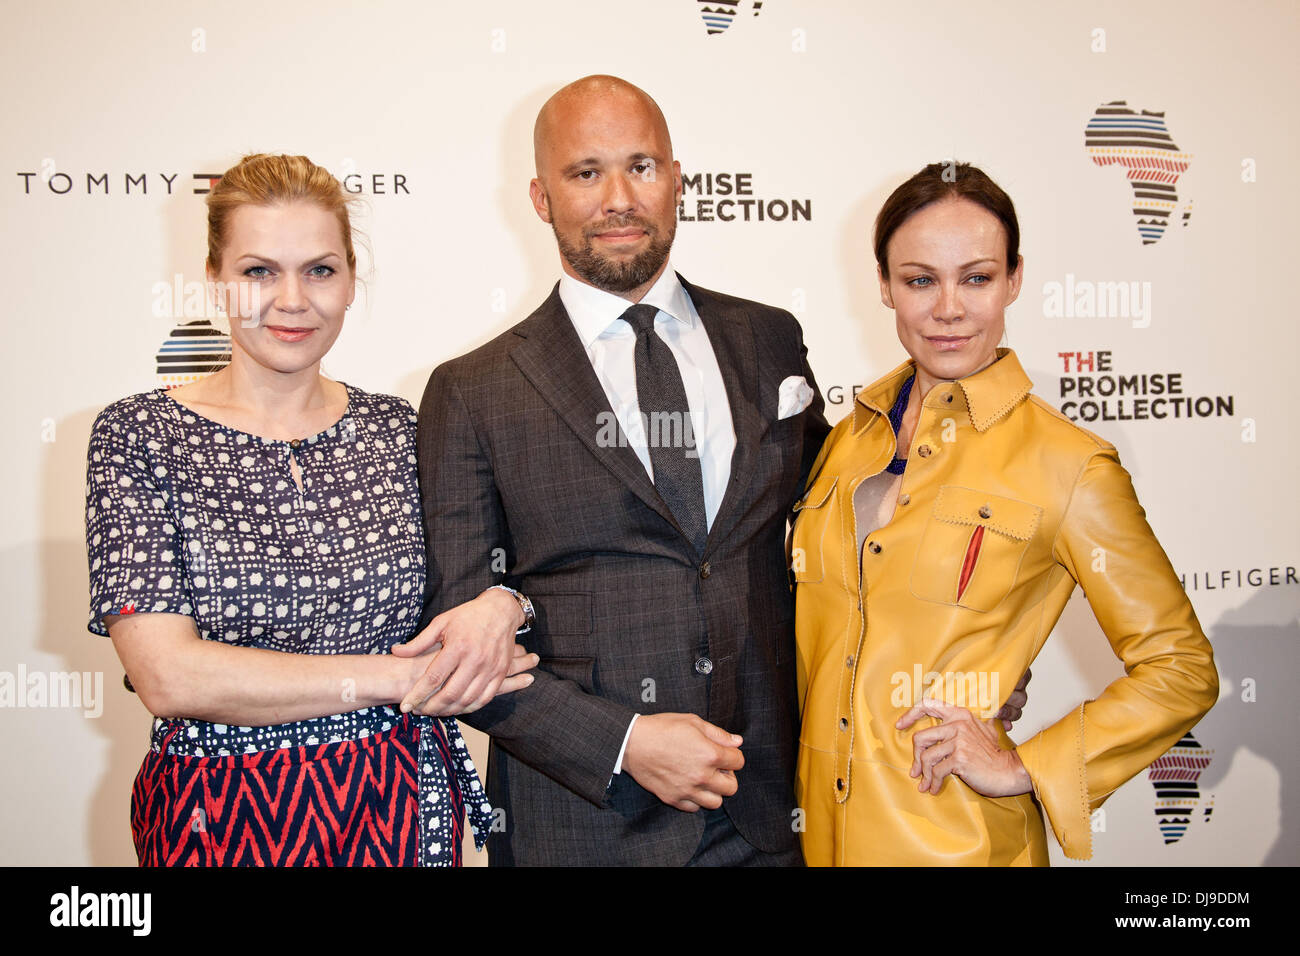 halvø kind ulykke Anna Loos, Oliver Timm and Sonja Kirchberger attending Tommy Hilfiger Store  Event 'The Promise' at Alte Post. Hamburg, Germany - 18.04.2012 Stock Photo  - Alamy